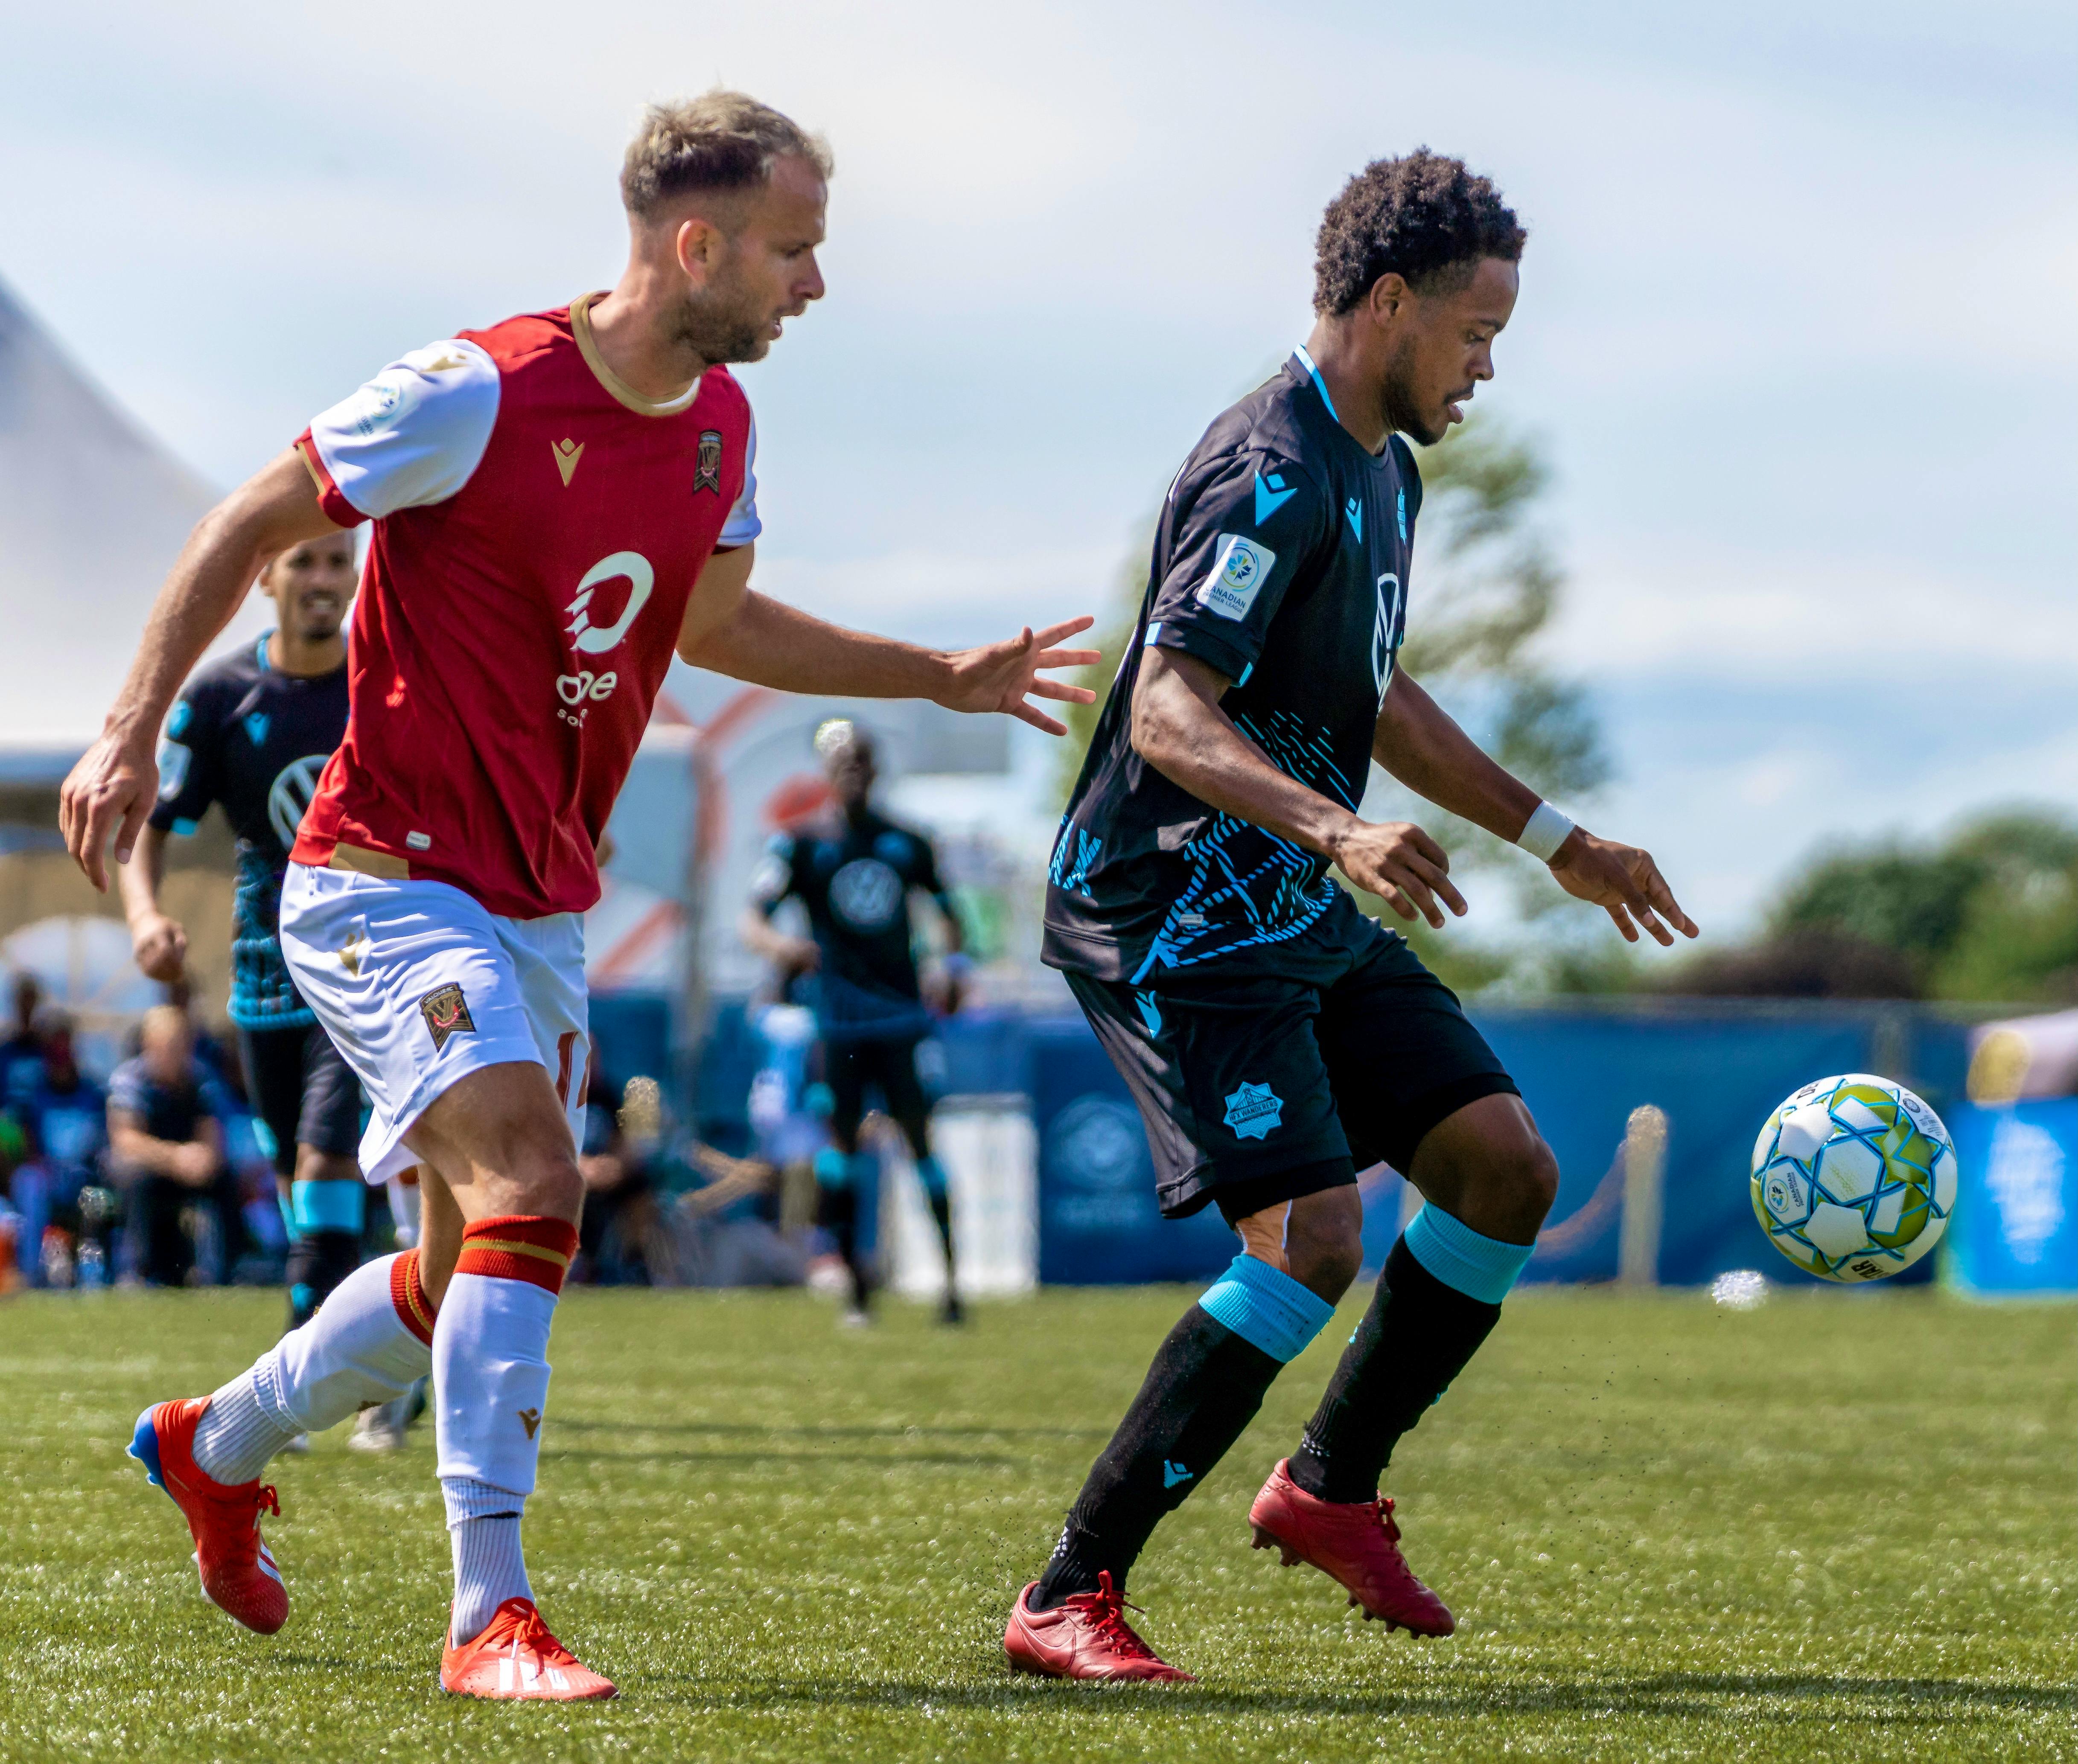 HFX Wanderers attacking midfielder Alex Marshall controls the ball during a match at the 2020 Island Games season tournament in Charlottetown. - Dylan Lawrence / HFX Wanderers